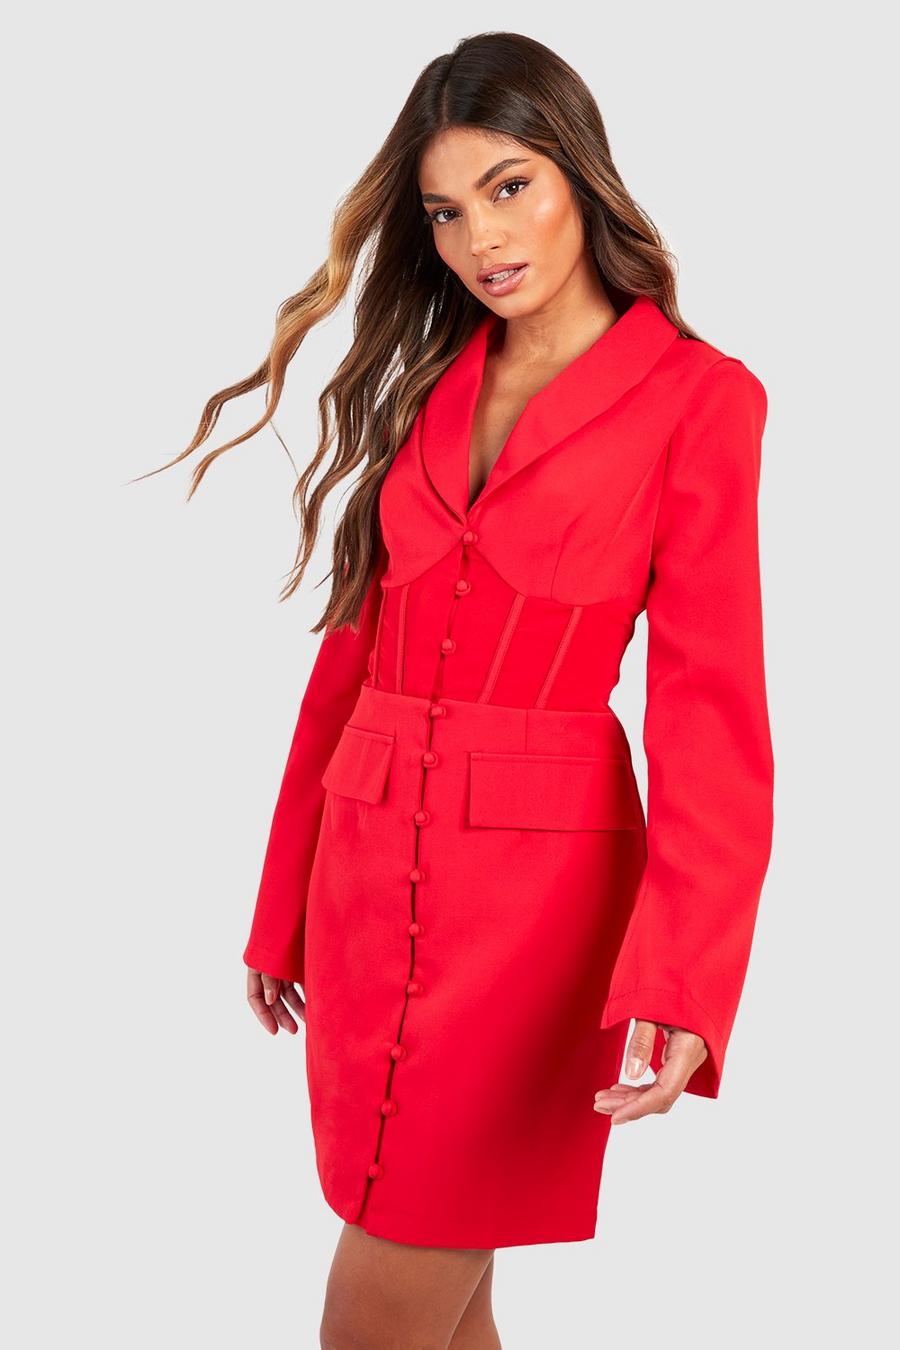 A Tailor Made It: corset suit second fit